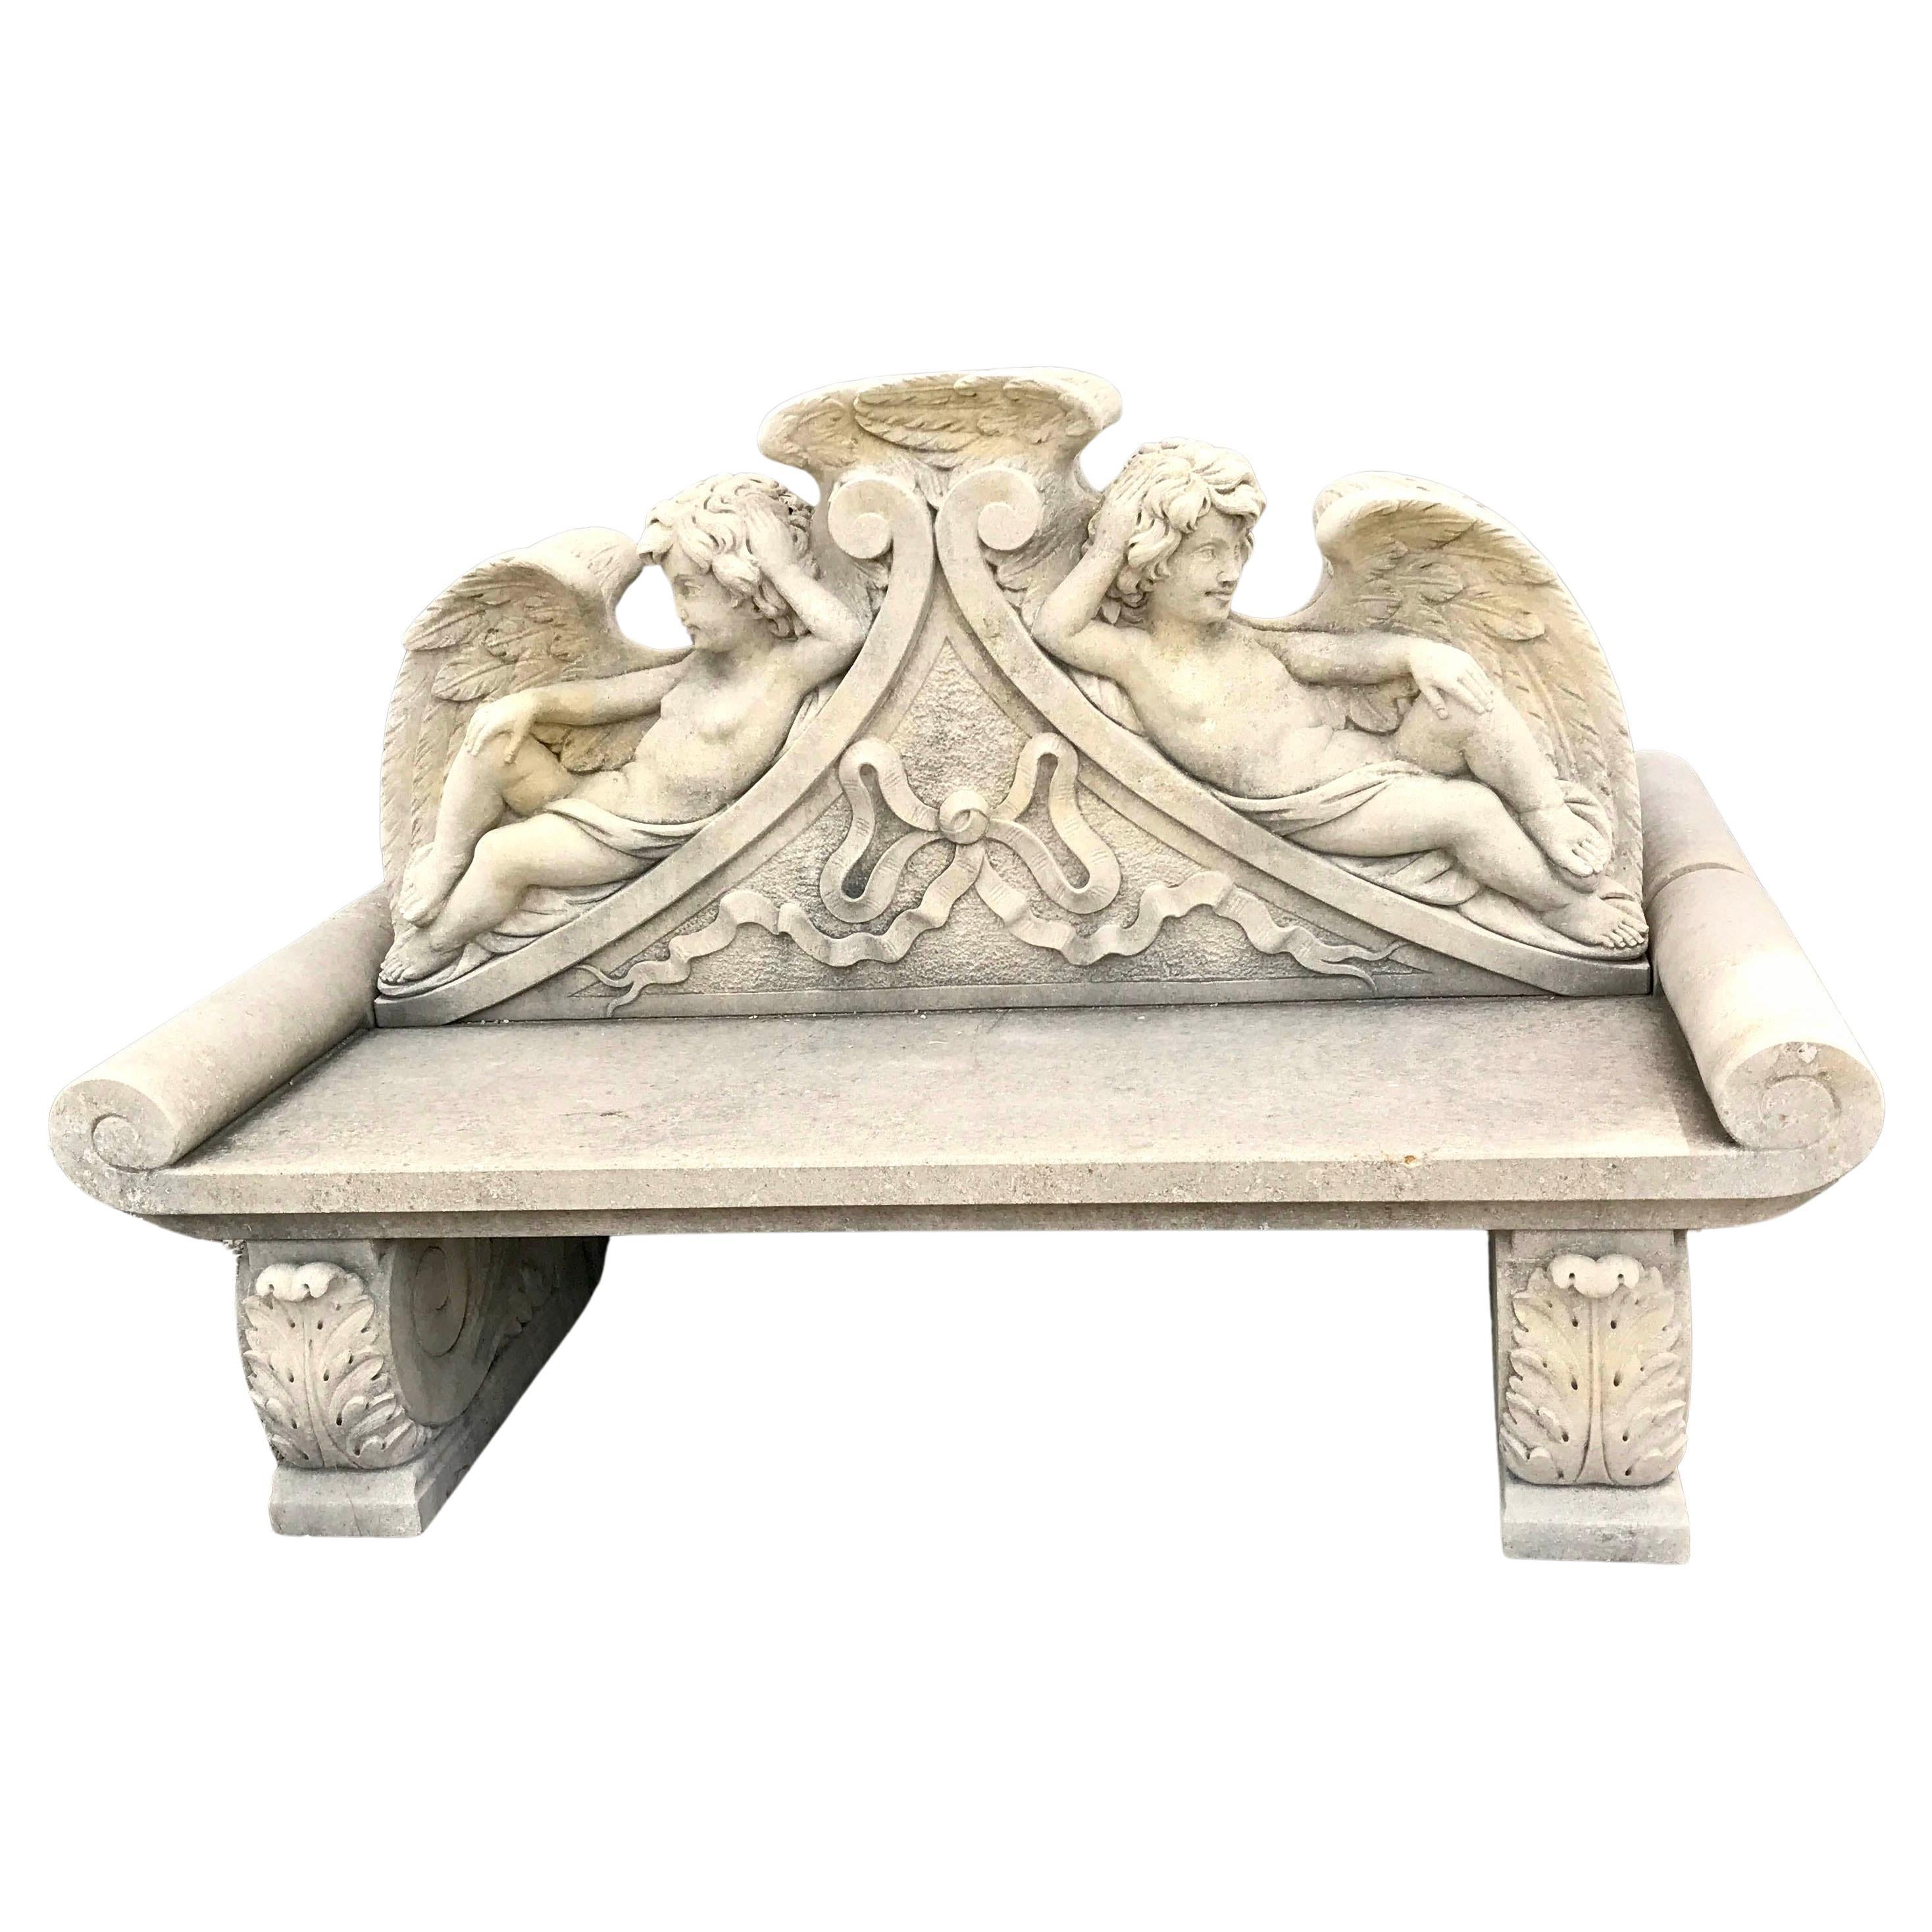 Outdoor Italian Finely Carved Large Lime Stone Bench Garden Furniture